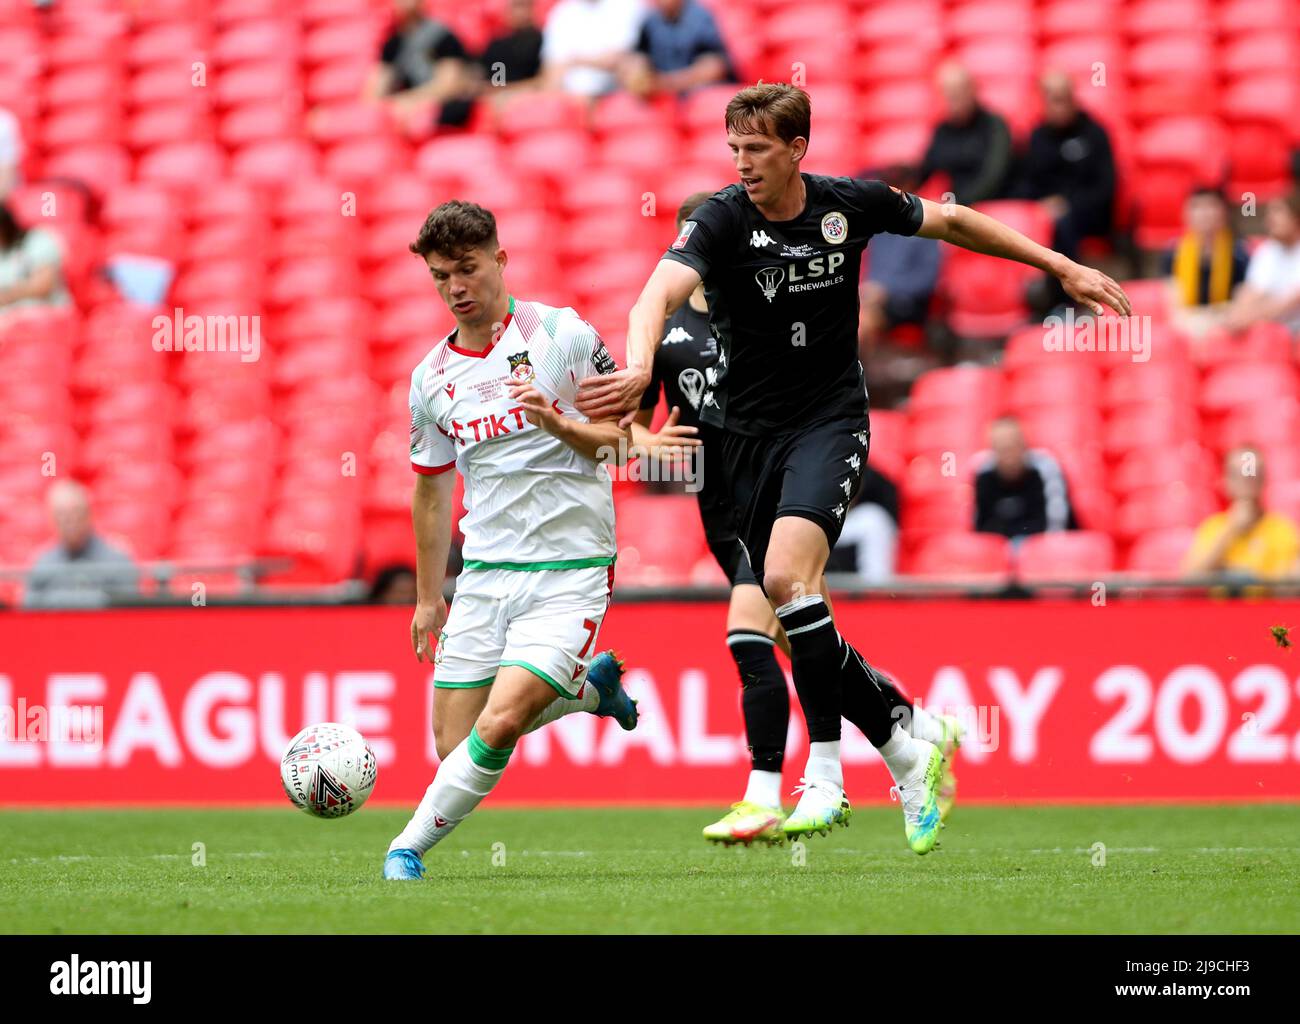 Wrexham's Jordan Davies (left) and Bromley's Joe Partington battle for the  ball during the Buildbase FA Trophy final at Wembley Stadium, London.  Picture date: Sunday May 22, 2022 Stock Photo - Alamy